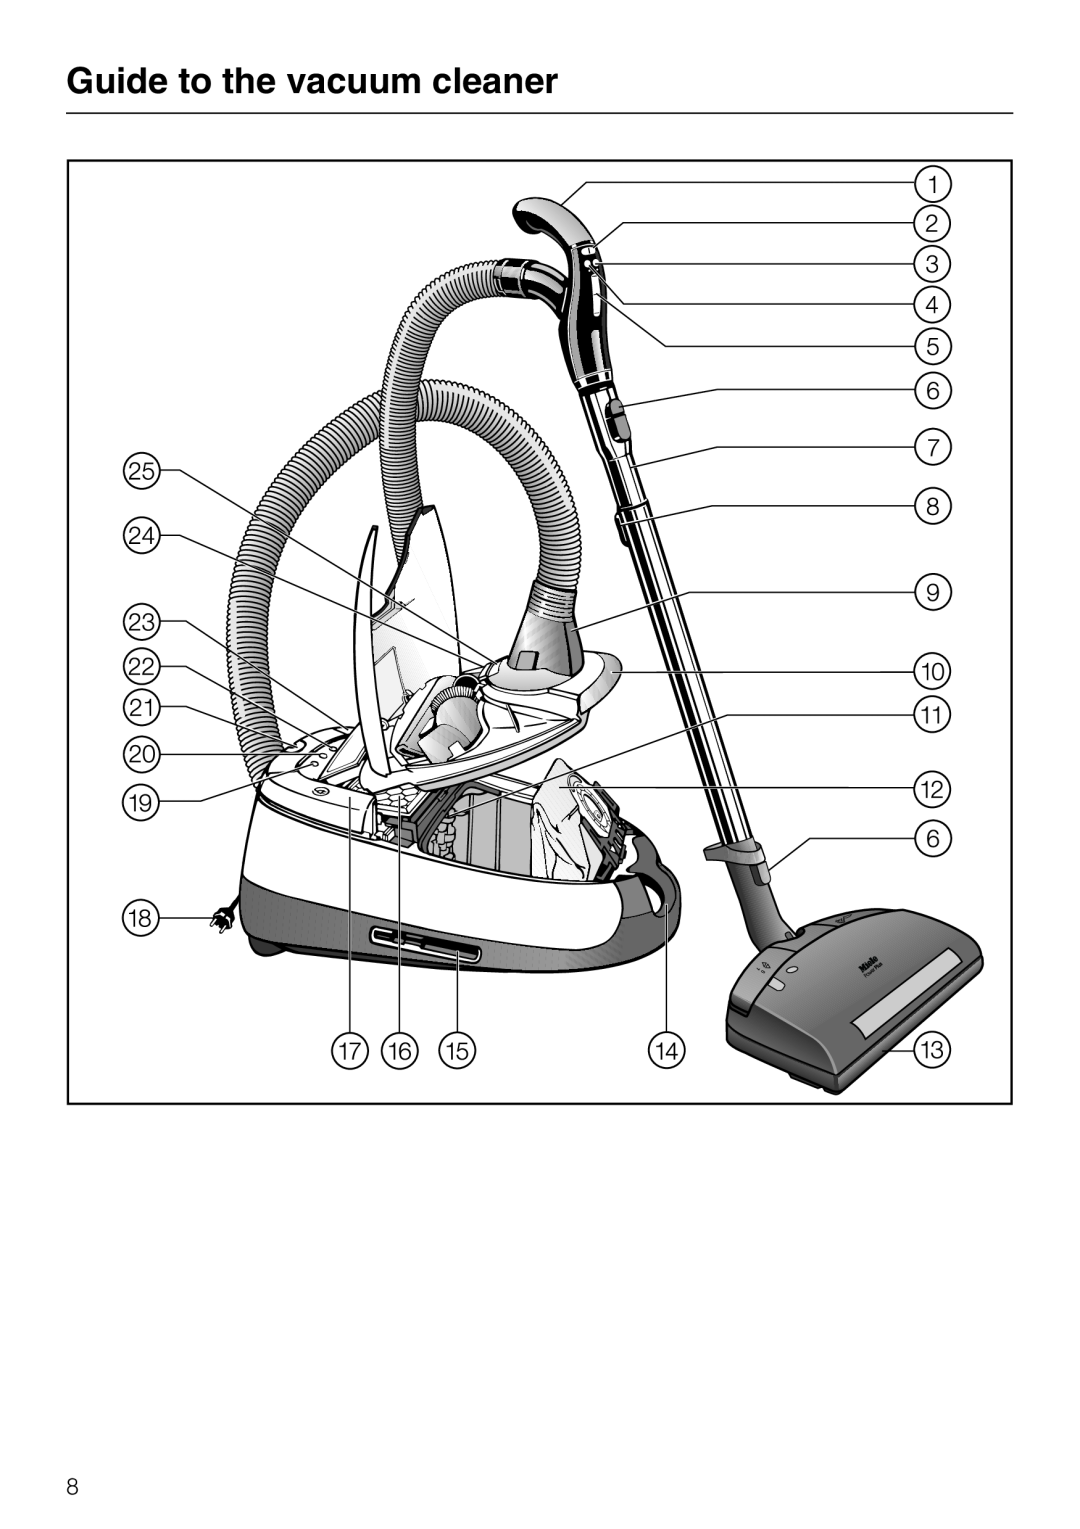 Miele S 5981 manual Guide to the vacuum cleaner 